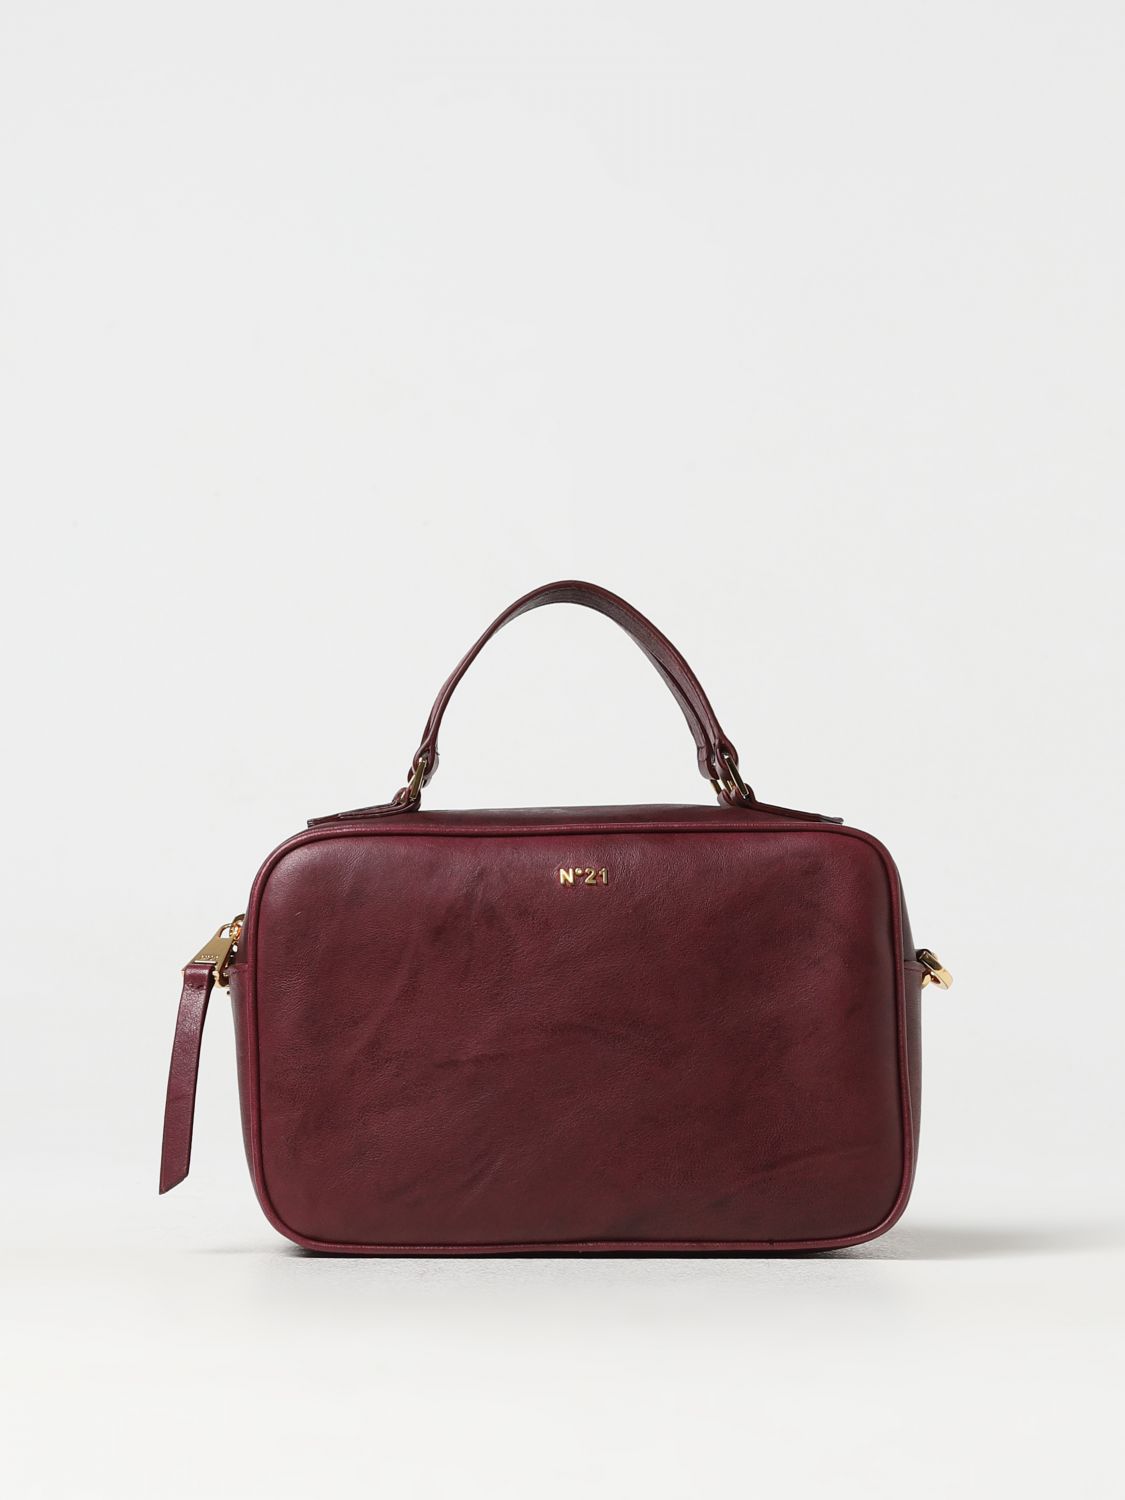 N°21 Bag In Used Leather With Shoulder Strap In Burgundy